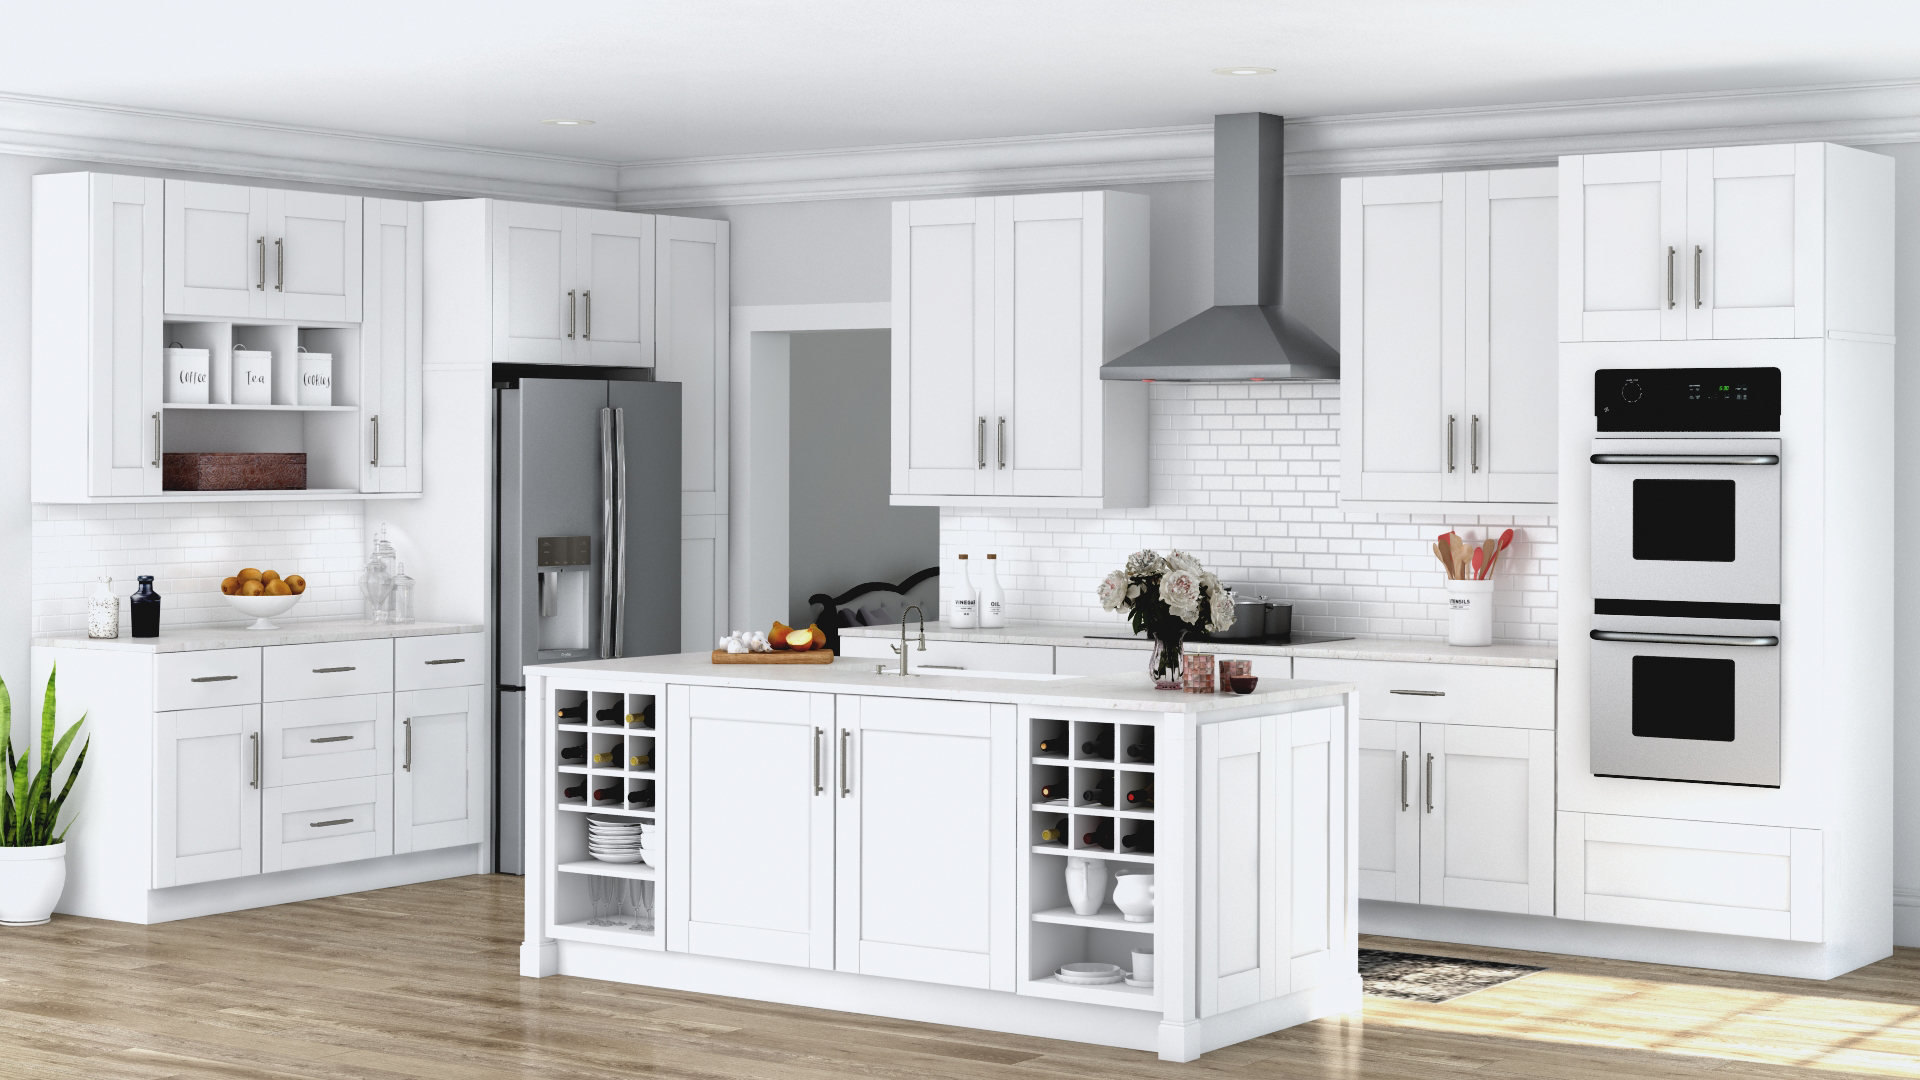 Improving the Home Way Better: Selecting Shaker Cabinets
